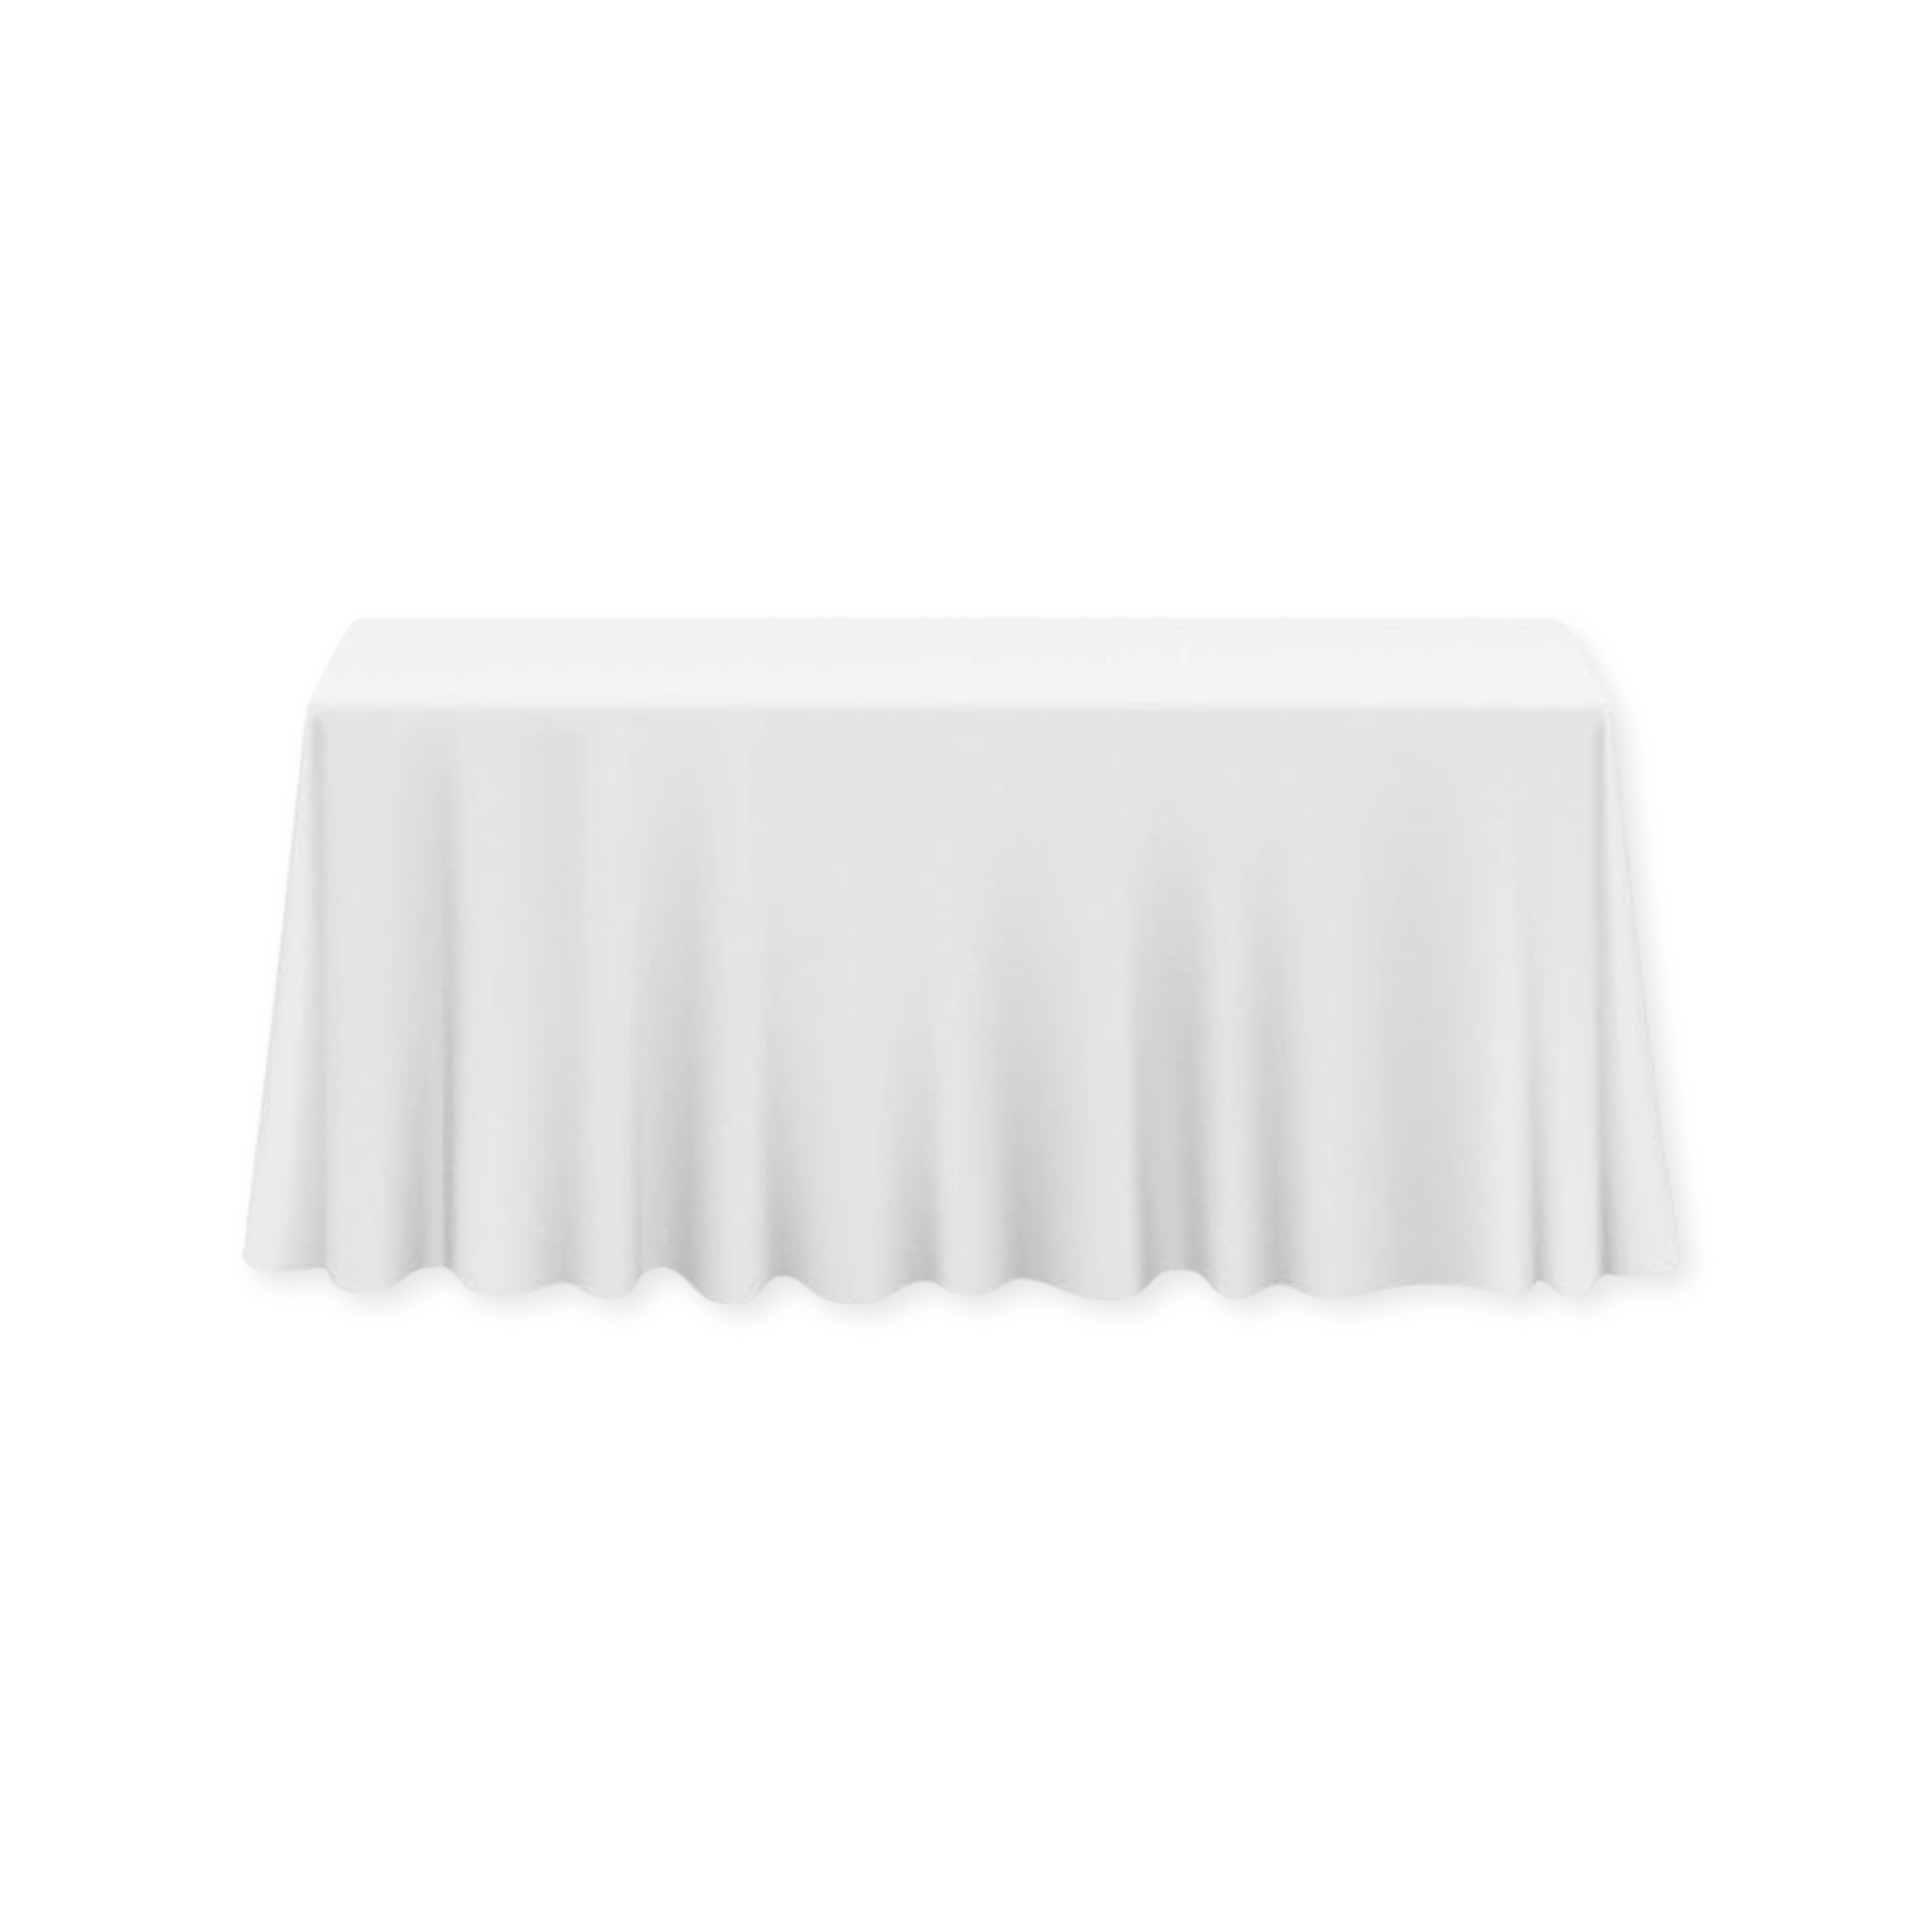 Tablecloth polyester rectangle white commercial grade wedding party event rental panama city beach